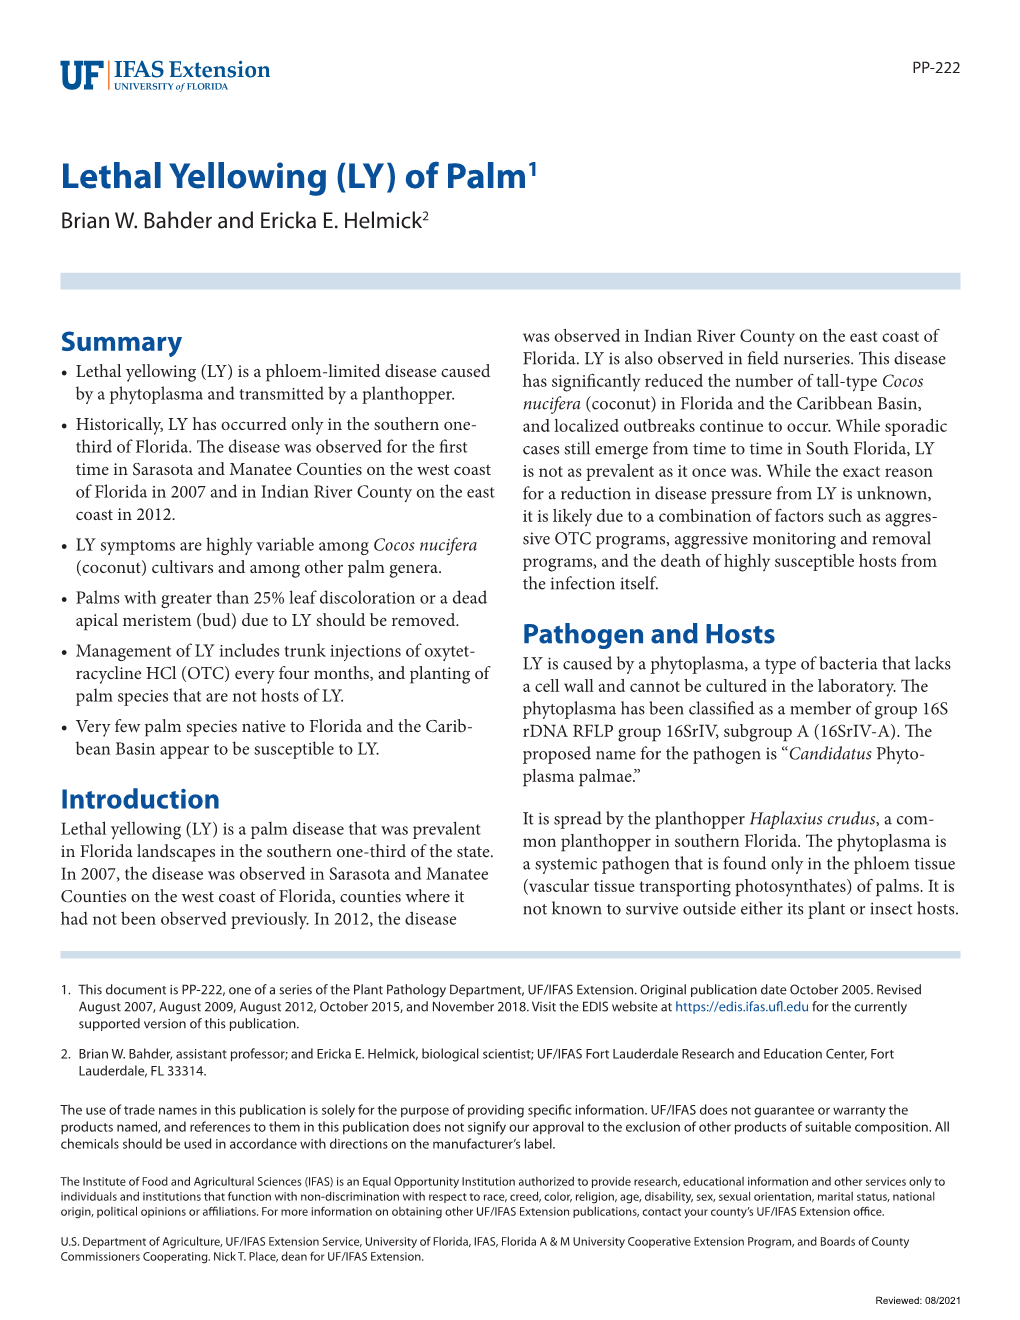 Lethal Yellowing (LY) of Palm1 Brian W